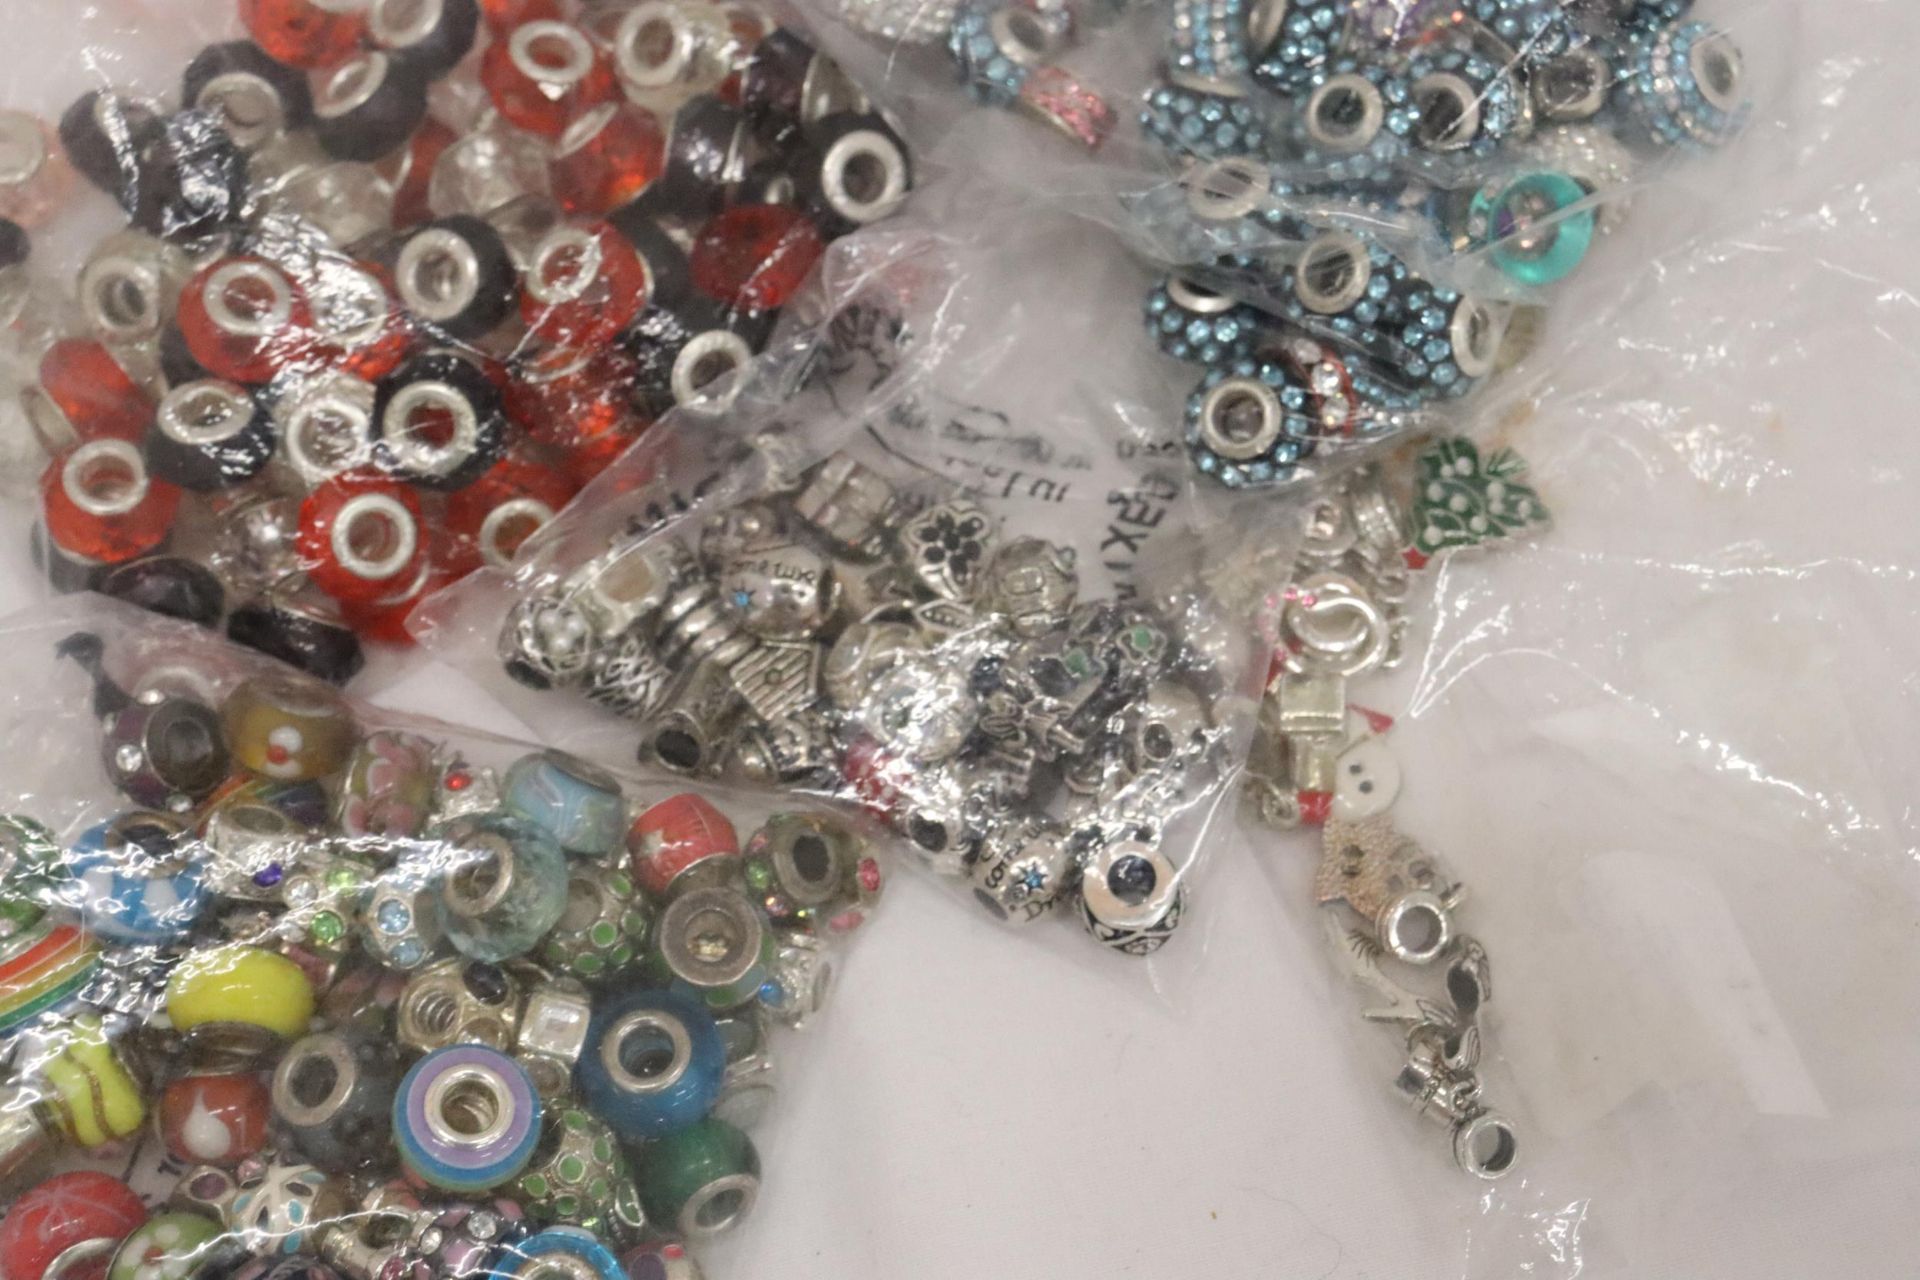 A LARGE QUANTITY OF PANDORA STYLE BEADS, SOME MARKED 925 - Image 5 of 7